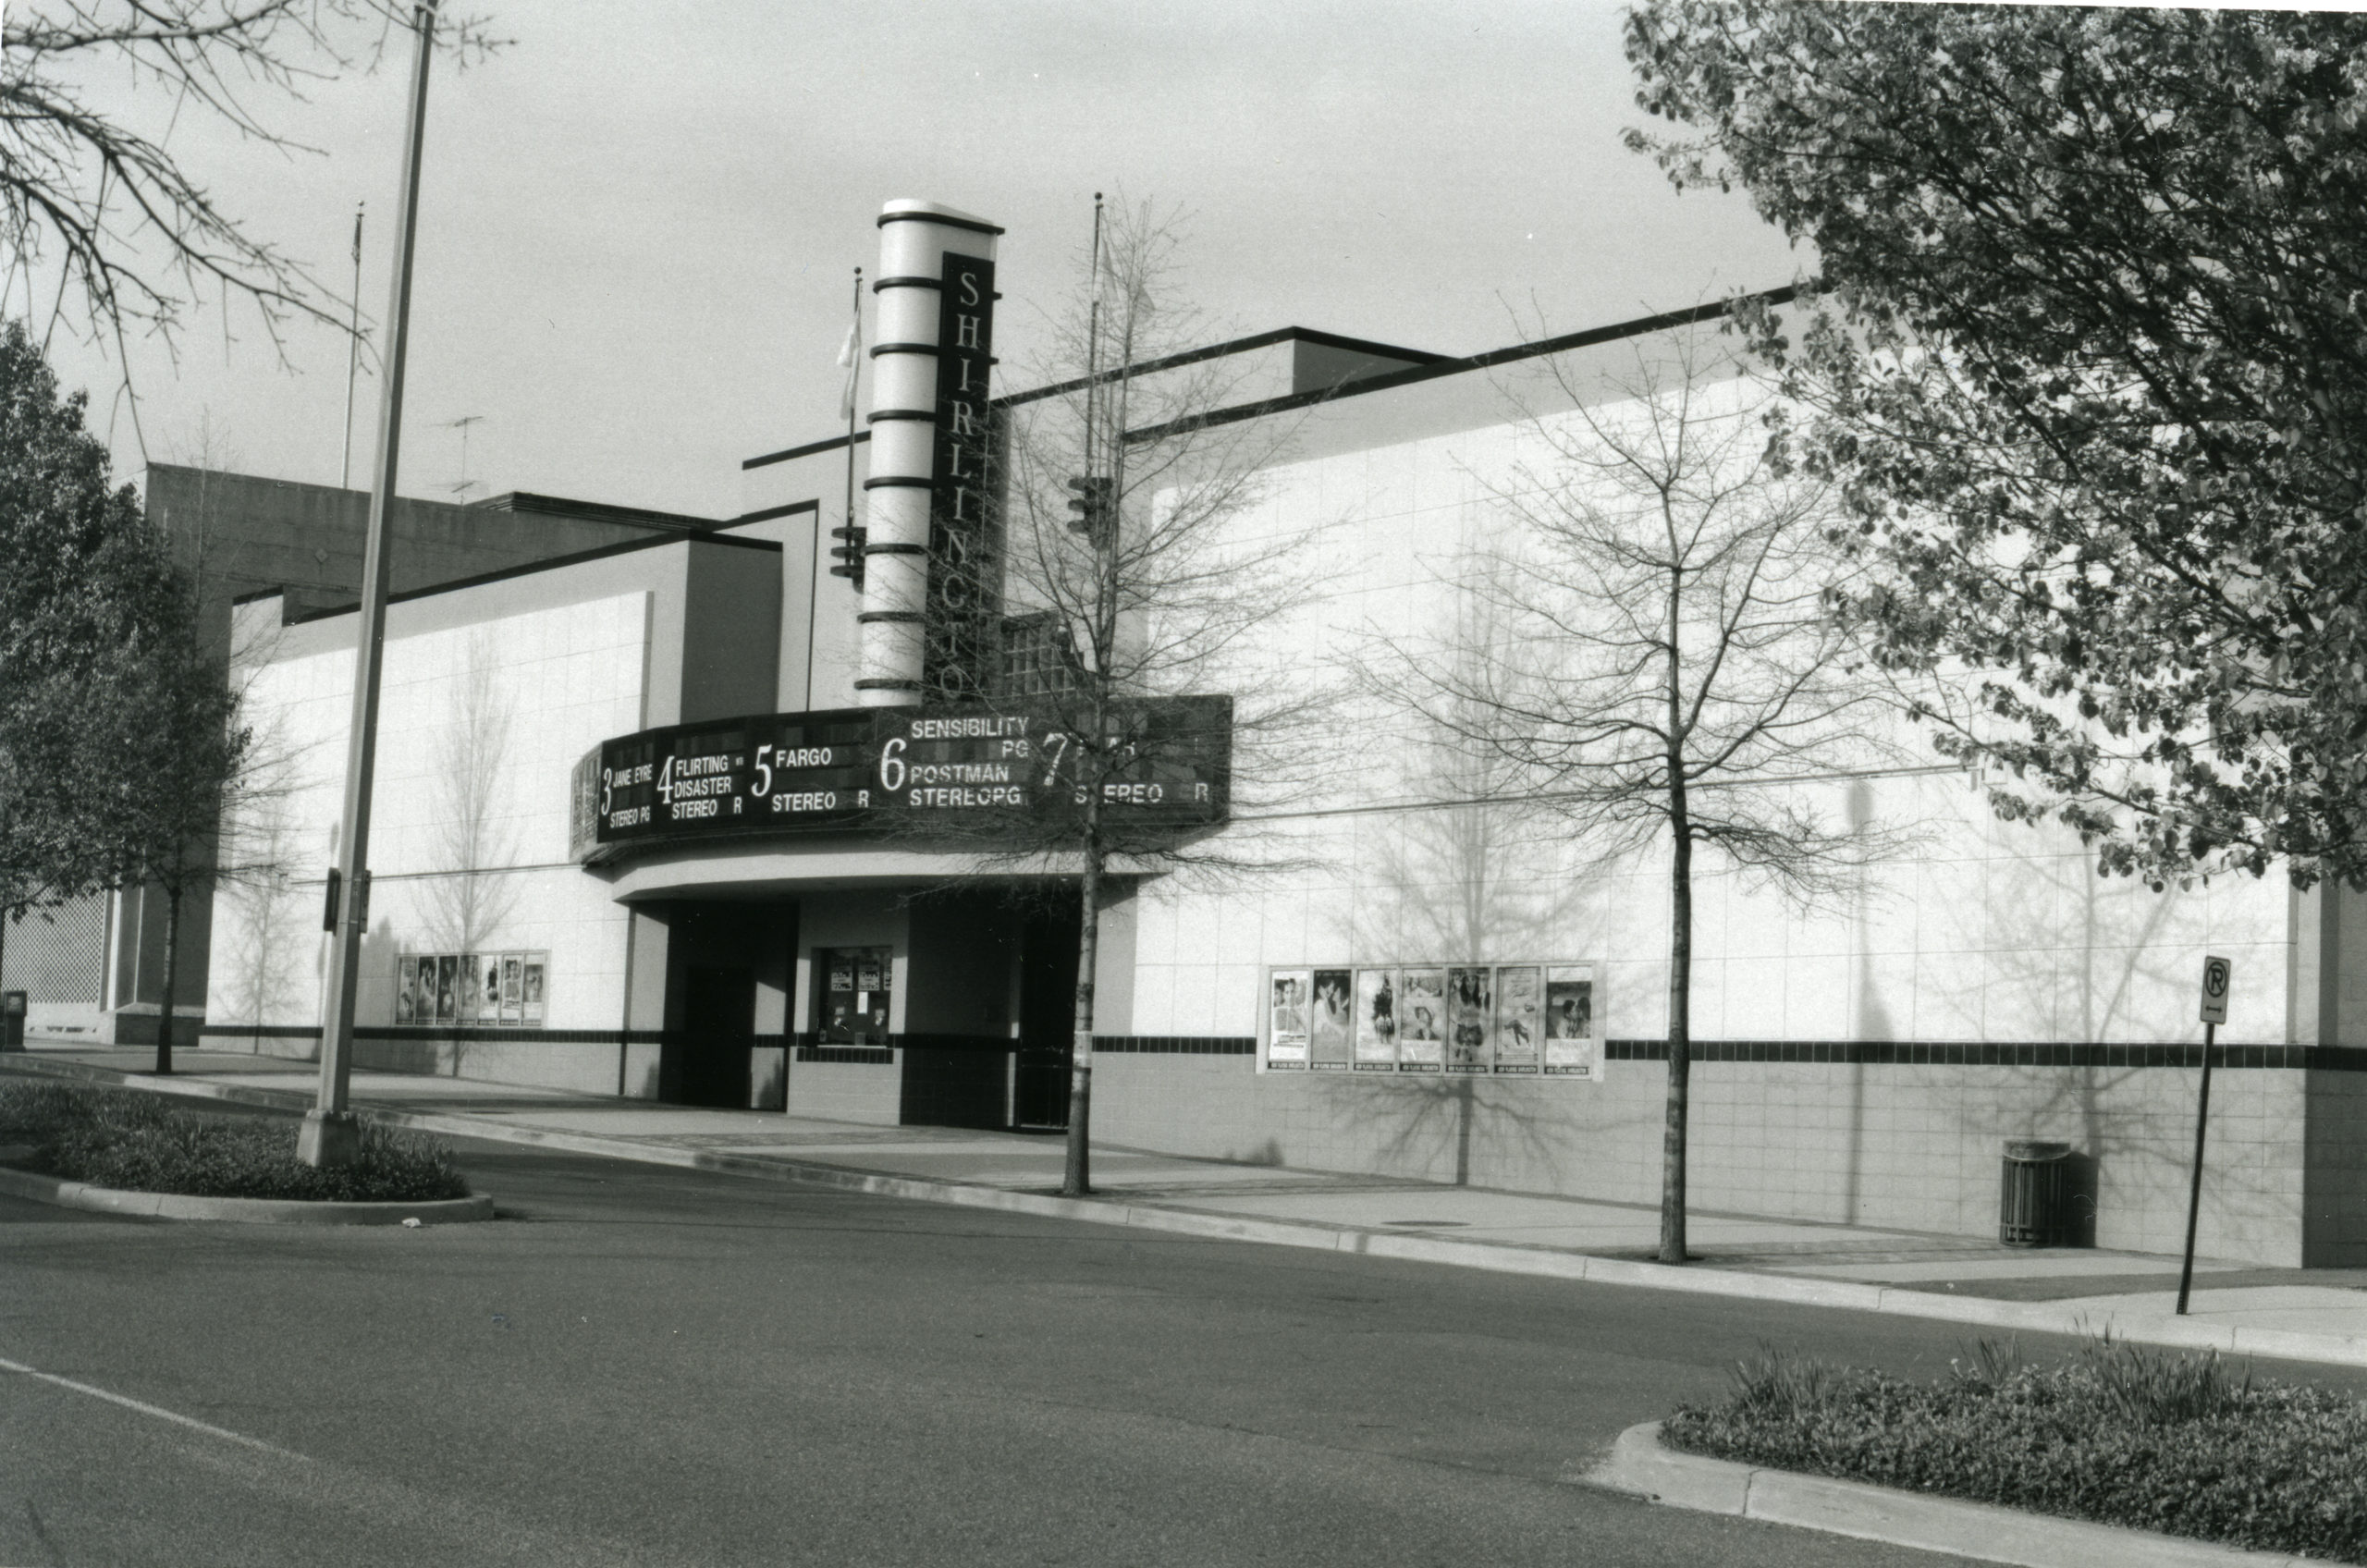 Shirlington movie theater, advertising Jane Eyre, Flirting with Disaster, Fargo, Sense and Sensibility, and the Postman. 1996, 1 negative, b&amp;w, 35mm.